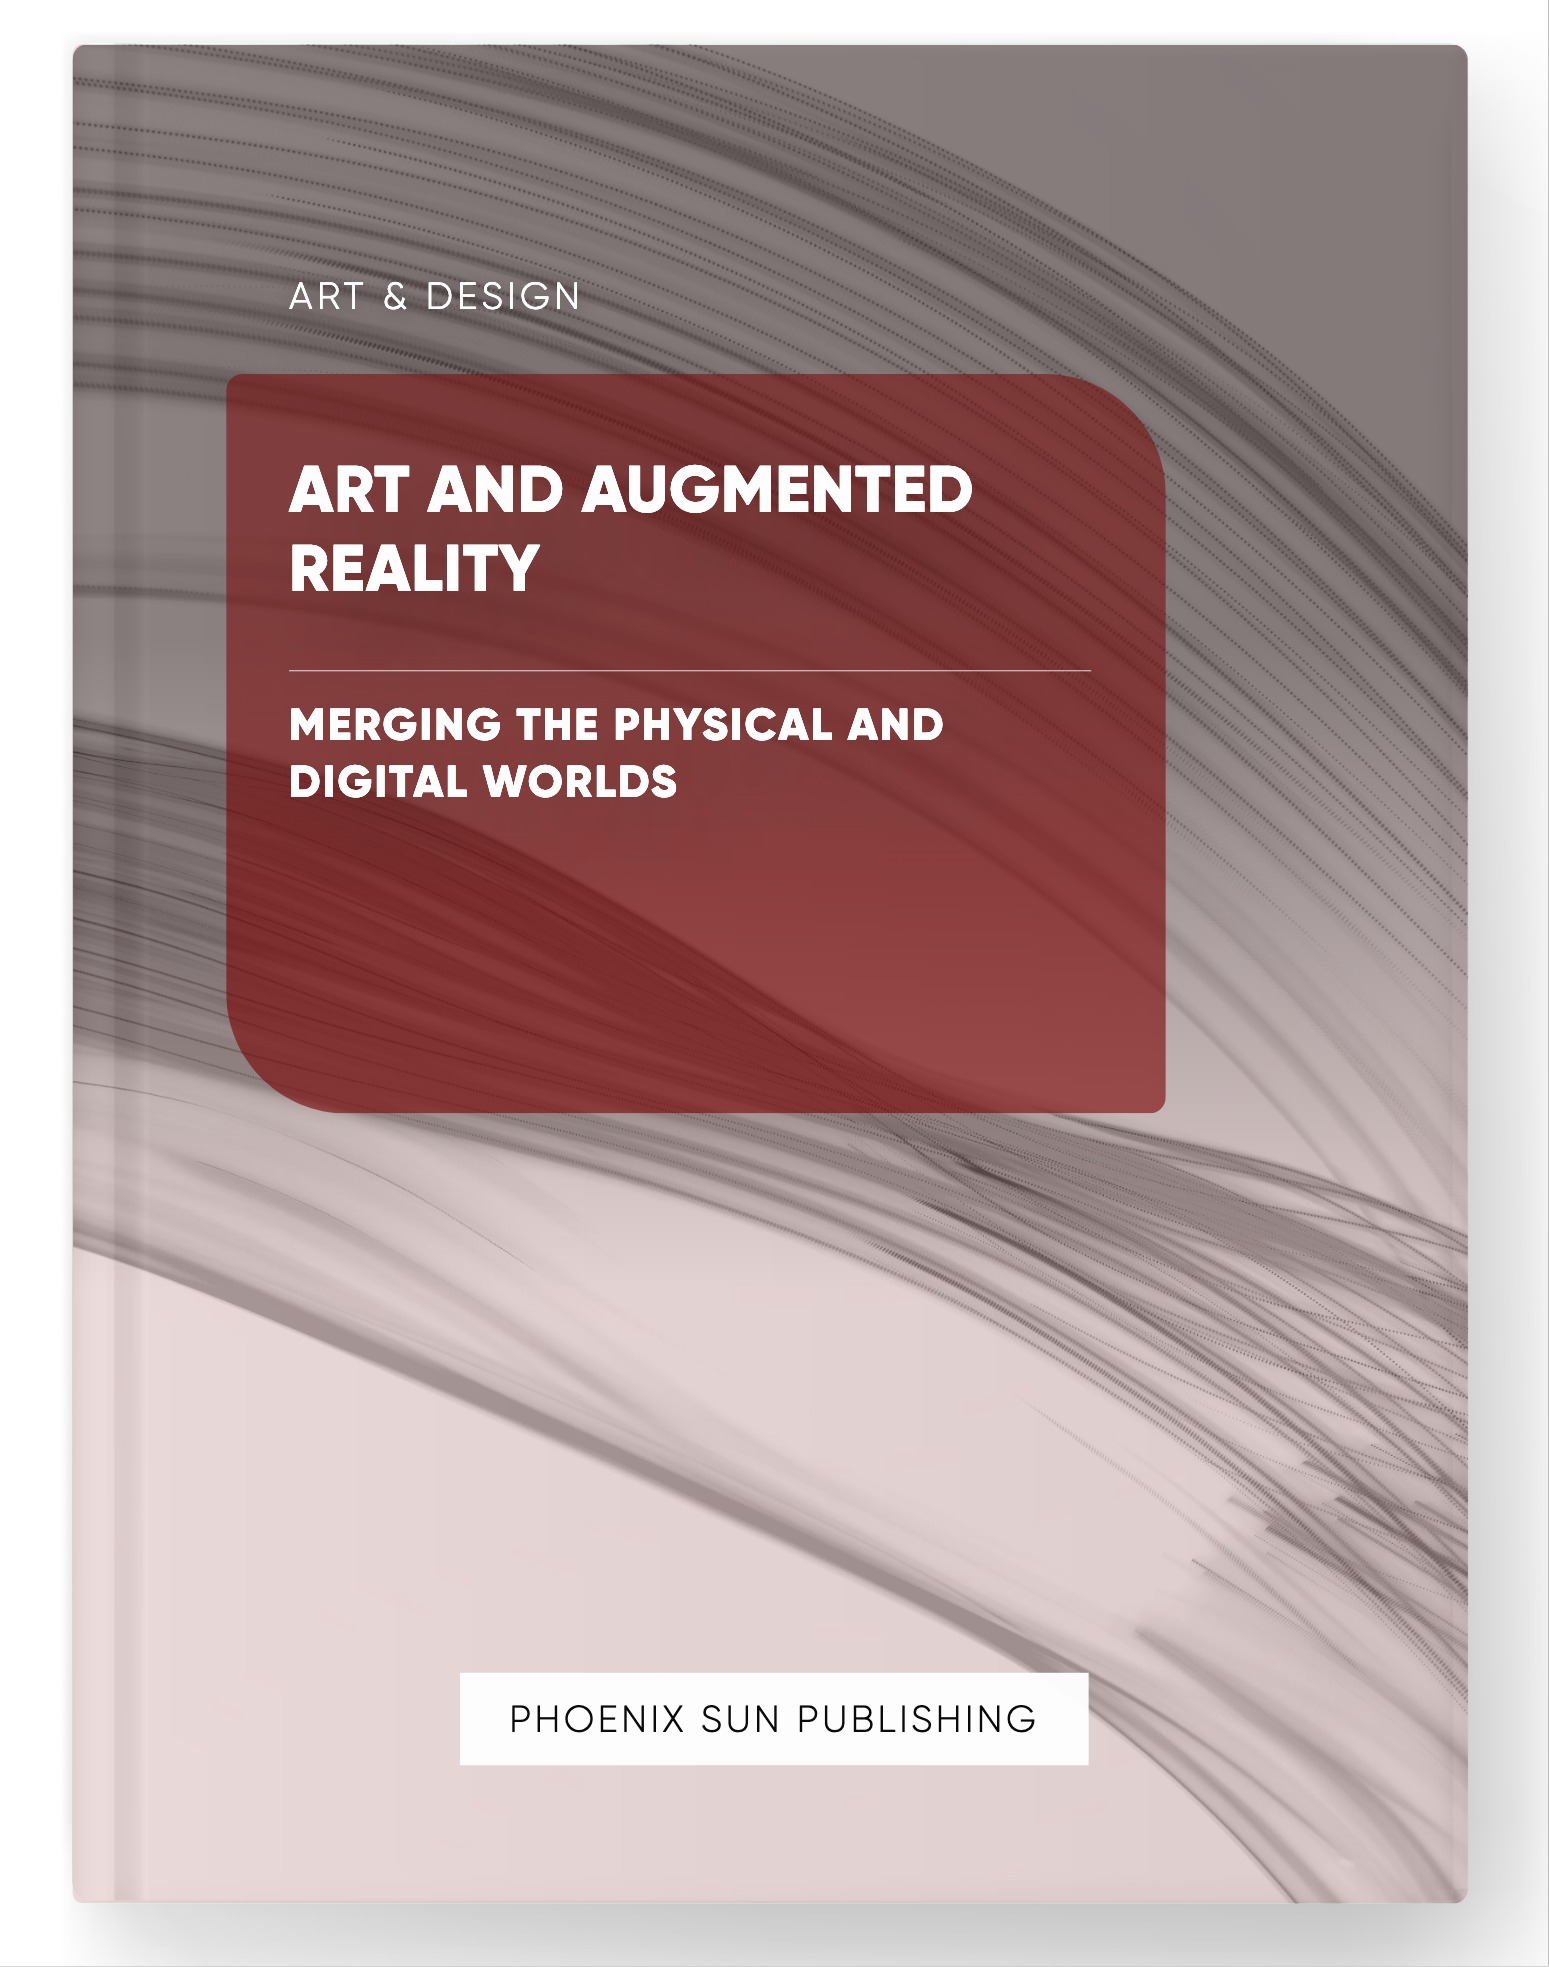 Art and Augmented Reality – Merging the Physical and Digital Worlds